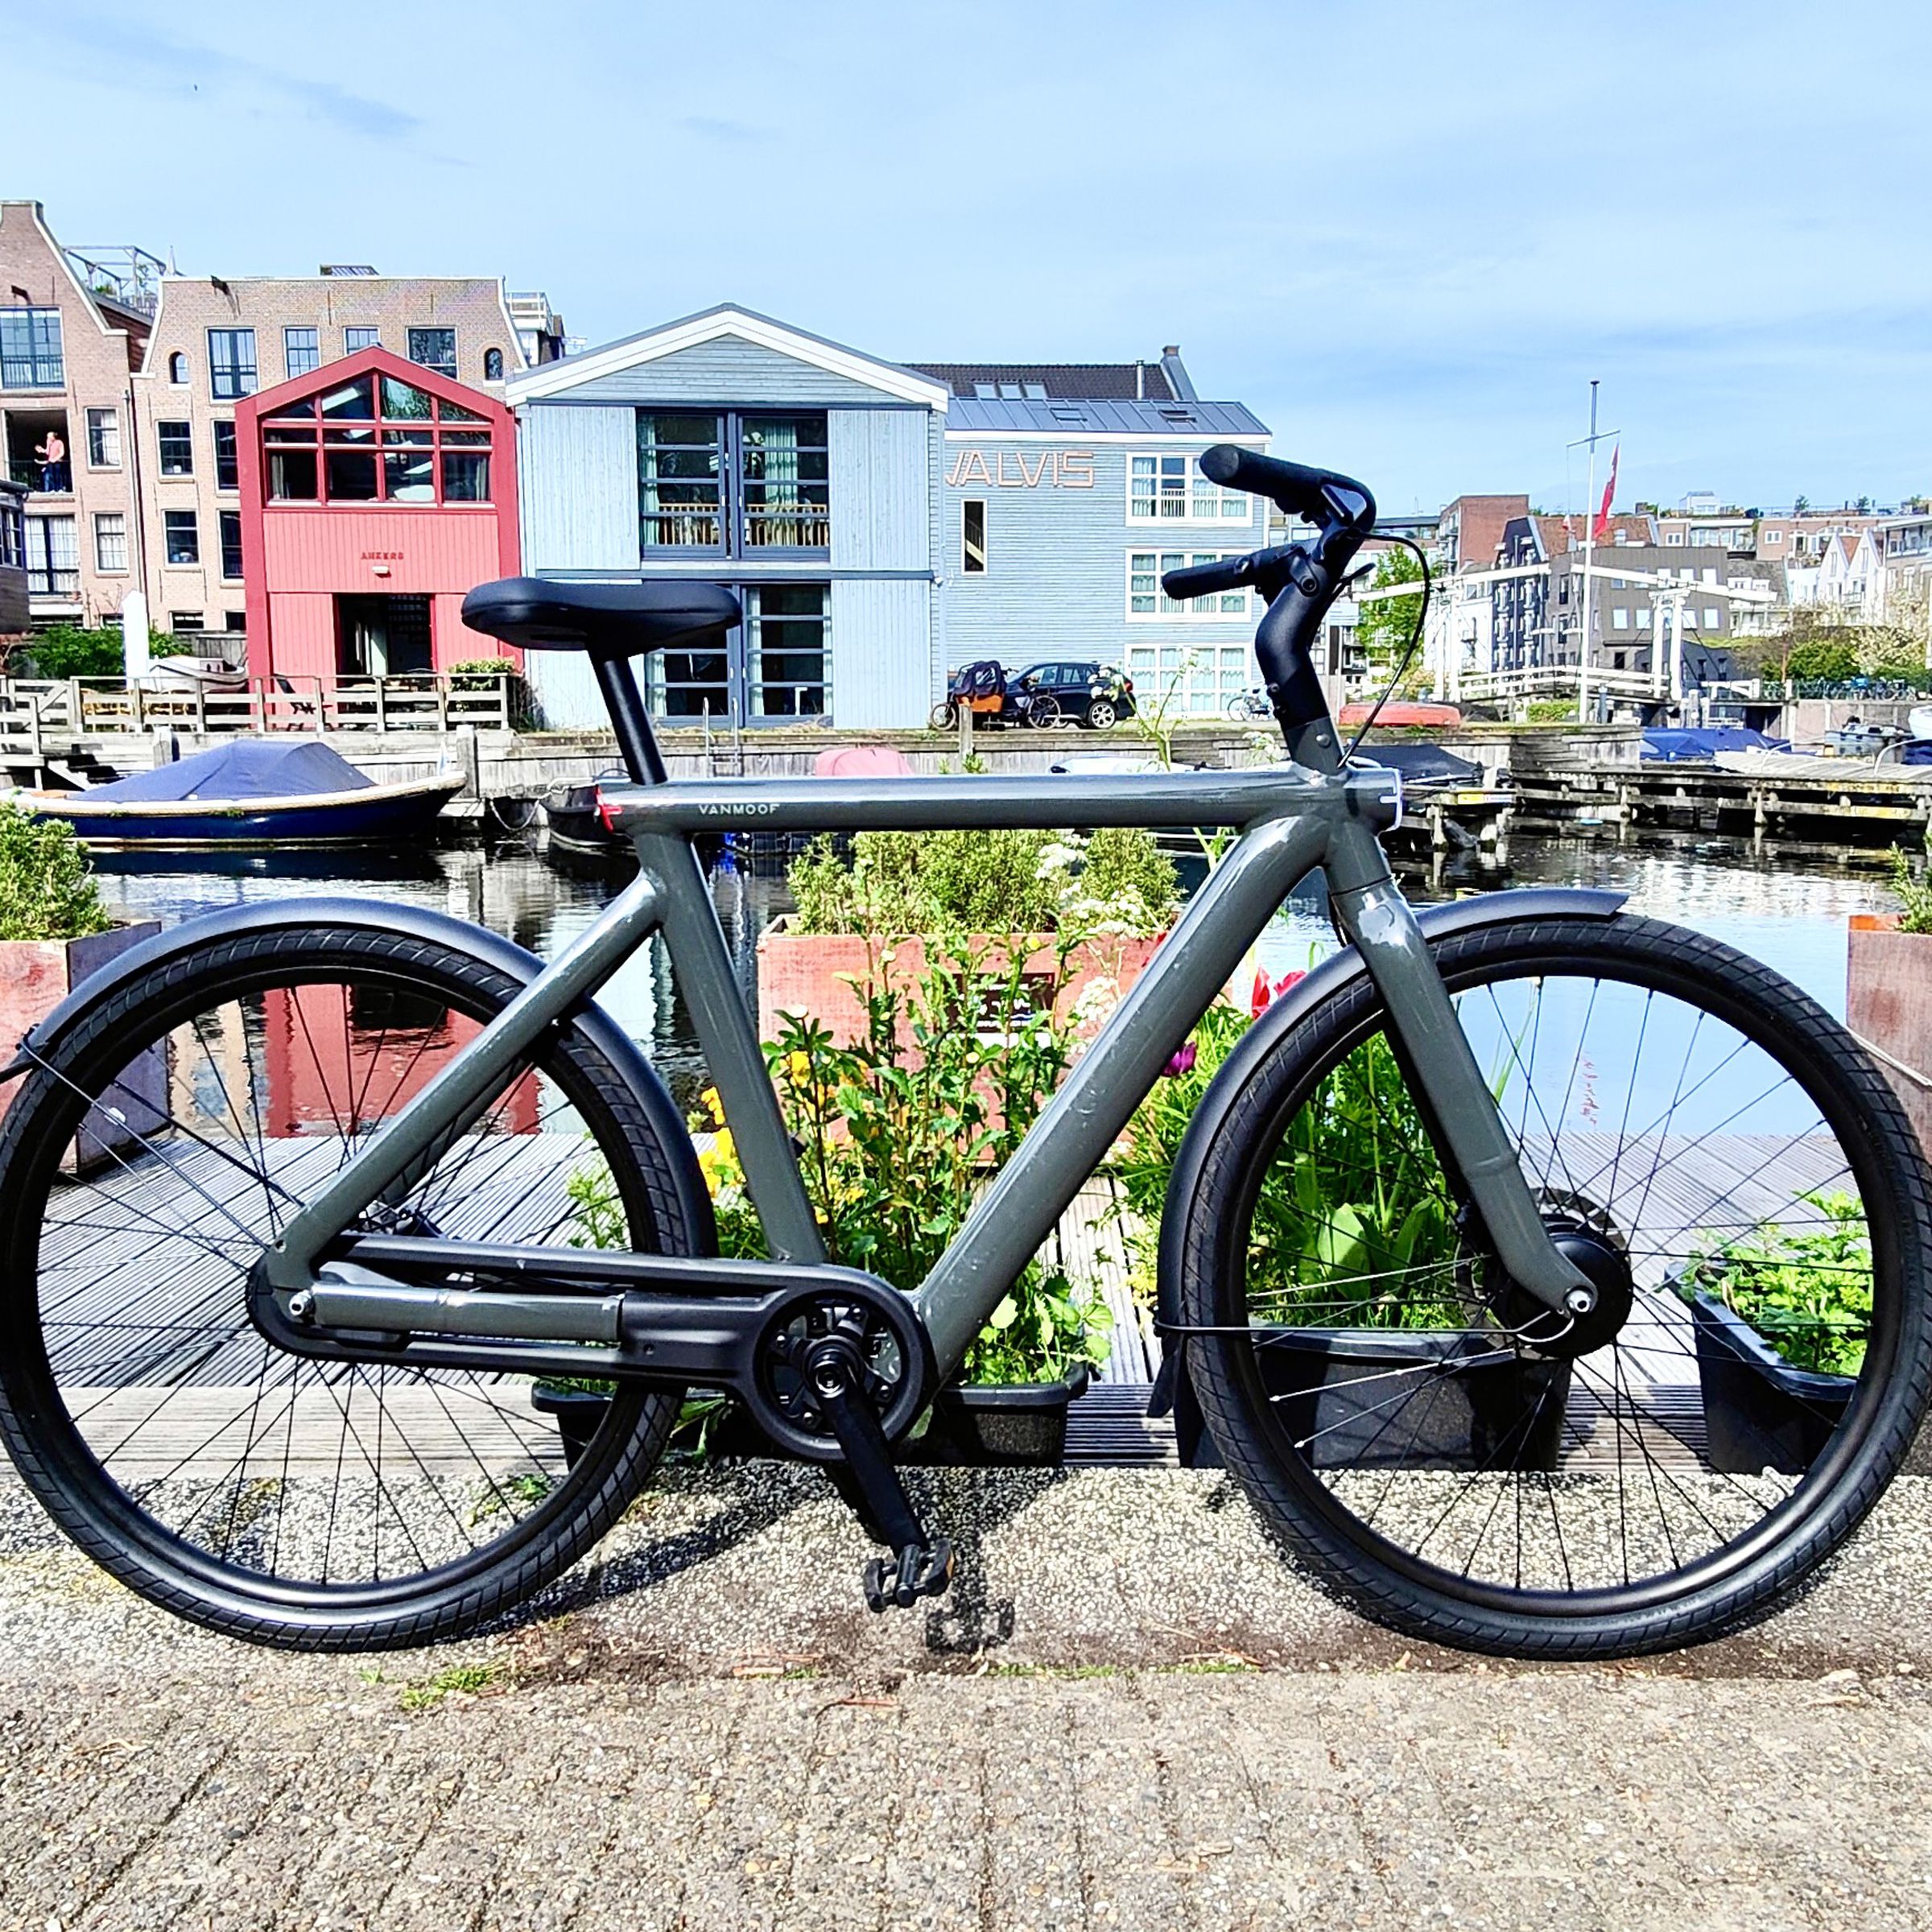 A dark gray electric VanMoof S5 bicycle stands in the foreground with modern Dutch homes, some light blue and red, in the background surrounded by water under a clear sky.